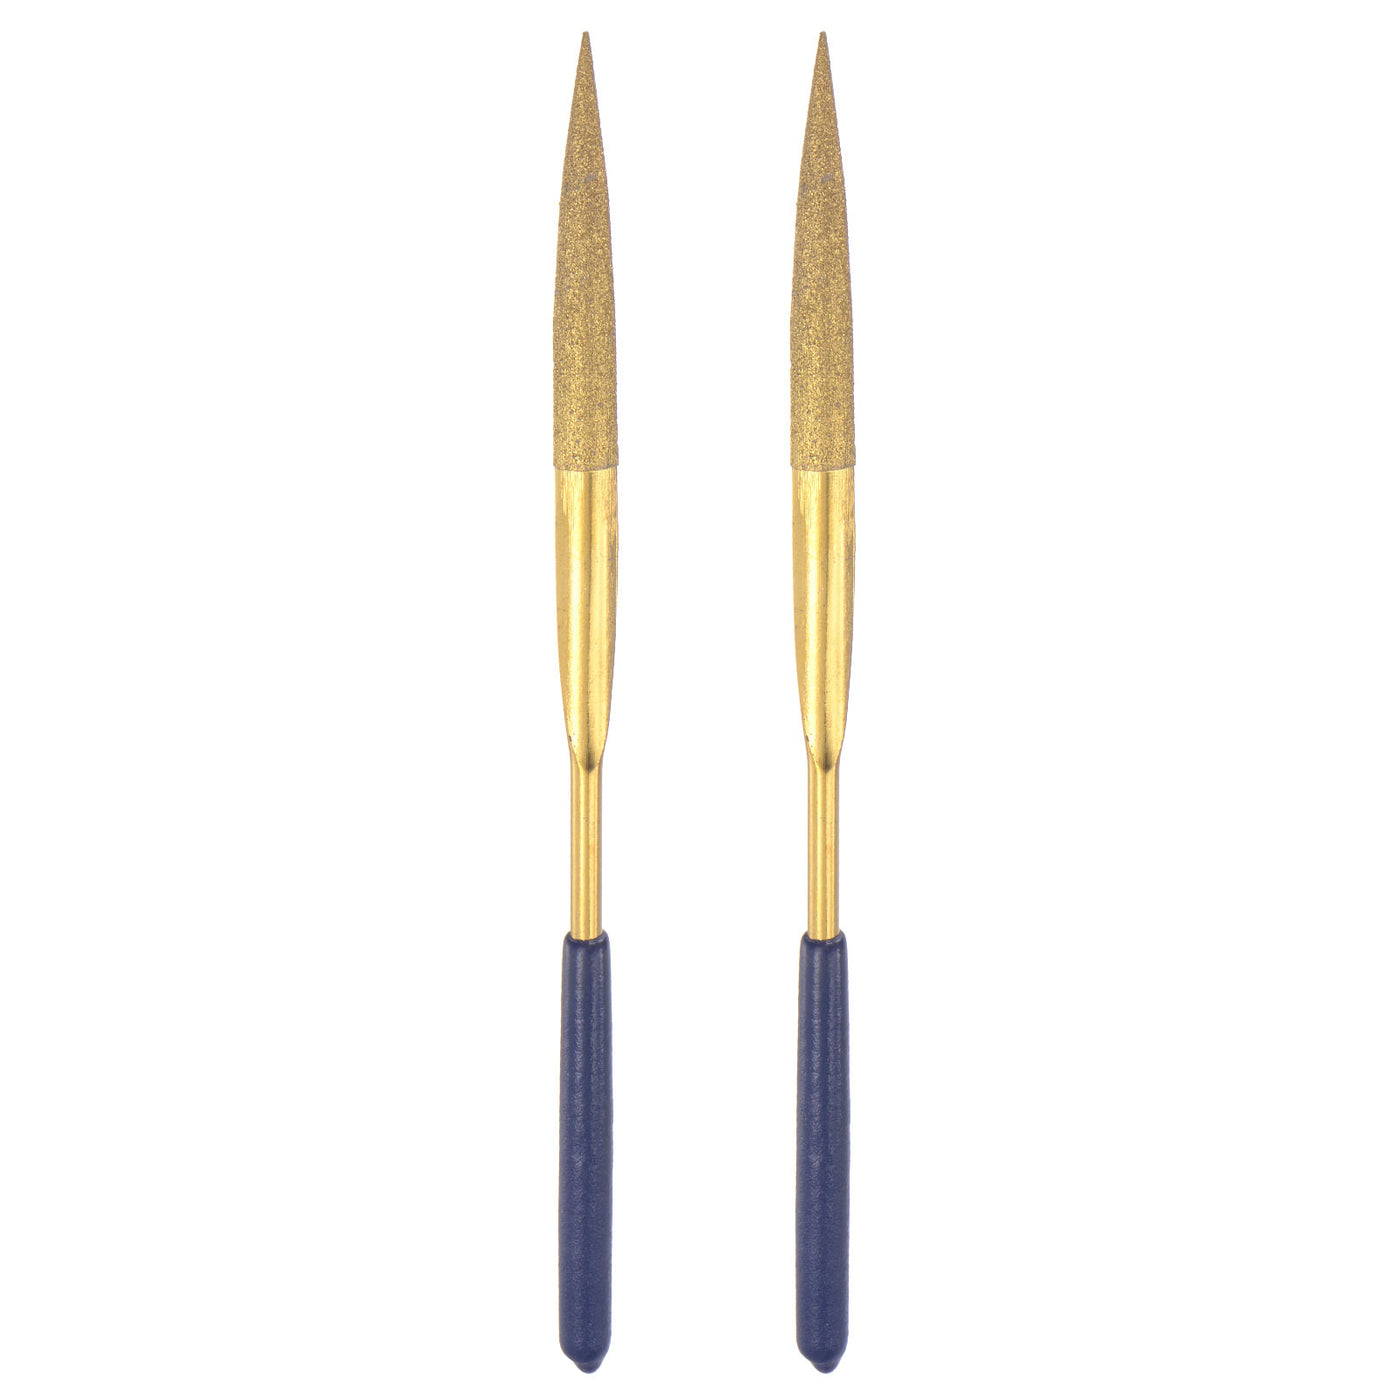 uxcell Uxcell 4mm x 160mm Titanium Coated Half Round Diamond Needle File for Wood Stone 2pcs